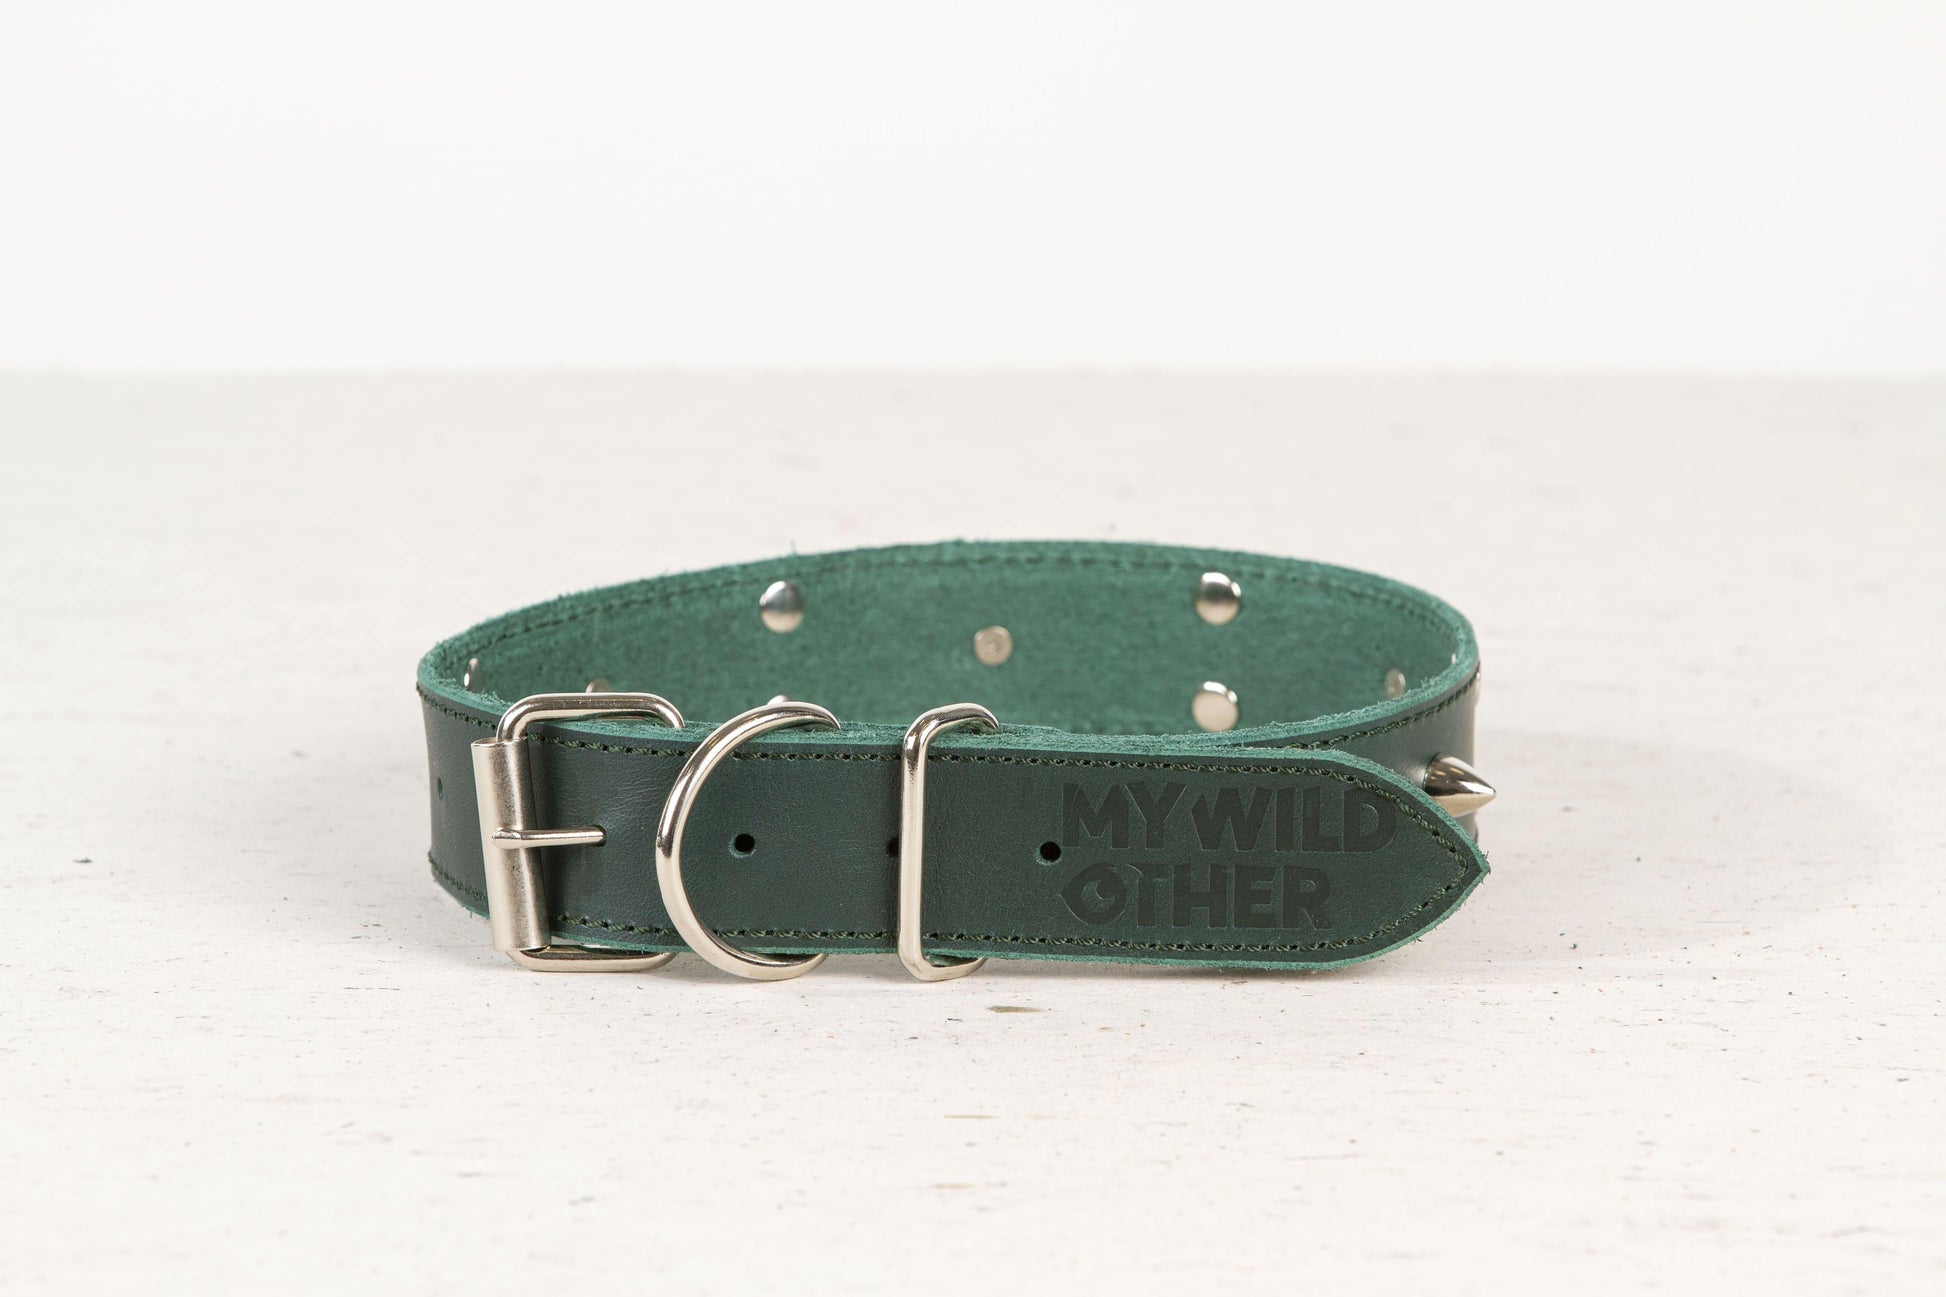 Handmade green leather STUDDED dog collar - European handmade dog accessories by My Wild Other